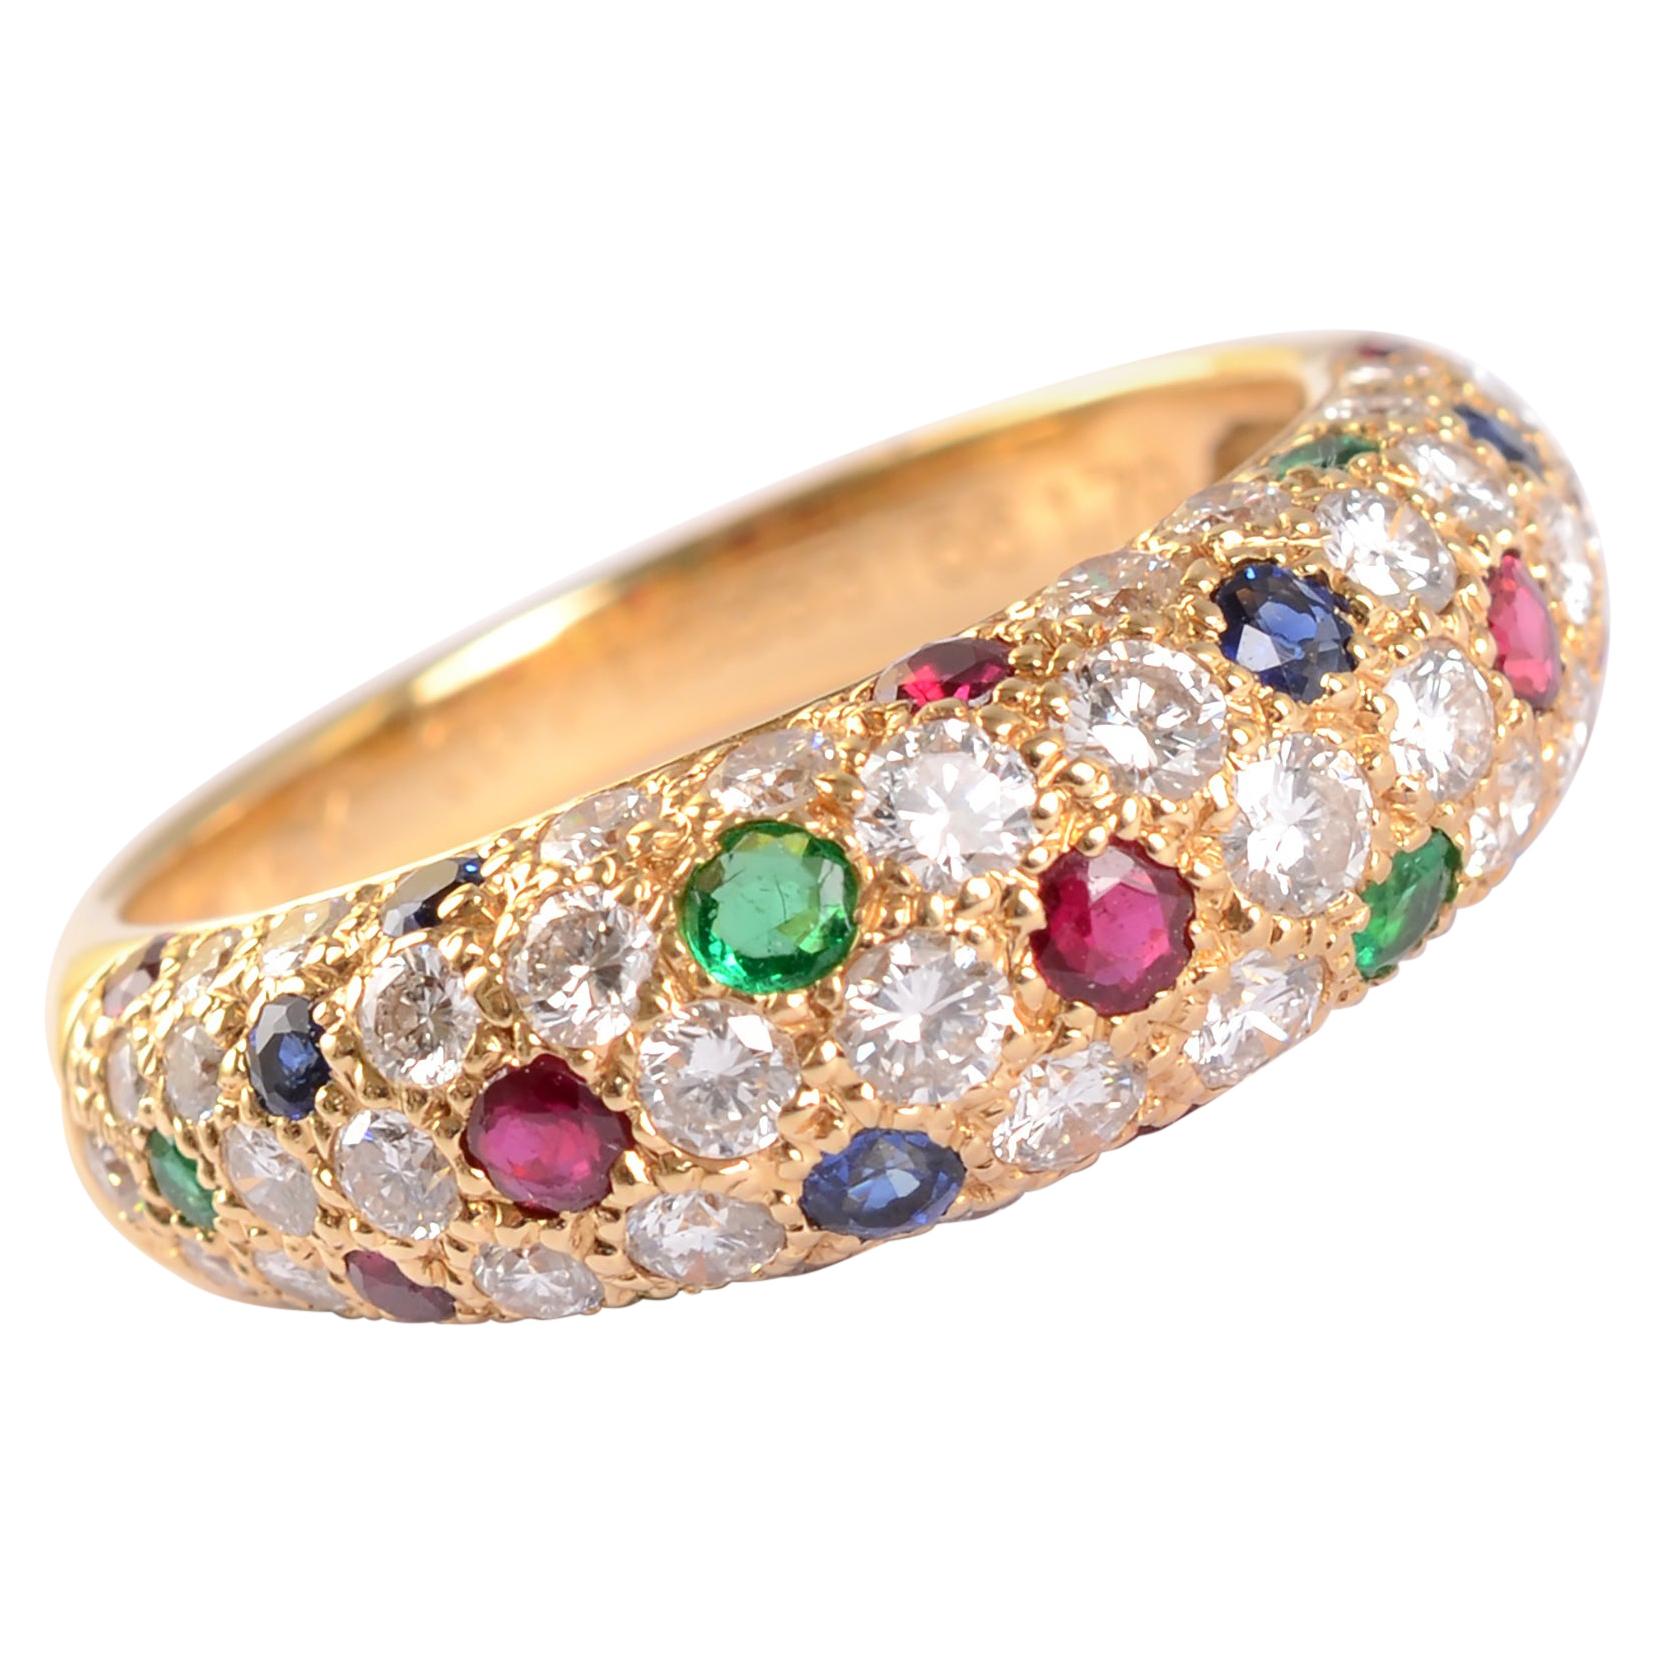 Van Cleef & Arpels Diamond Cocktail Ring with Rubies, Sapphires and Emeralds